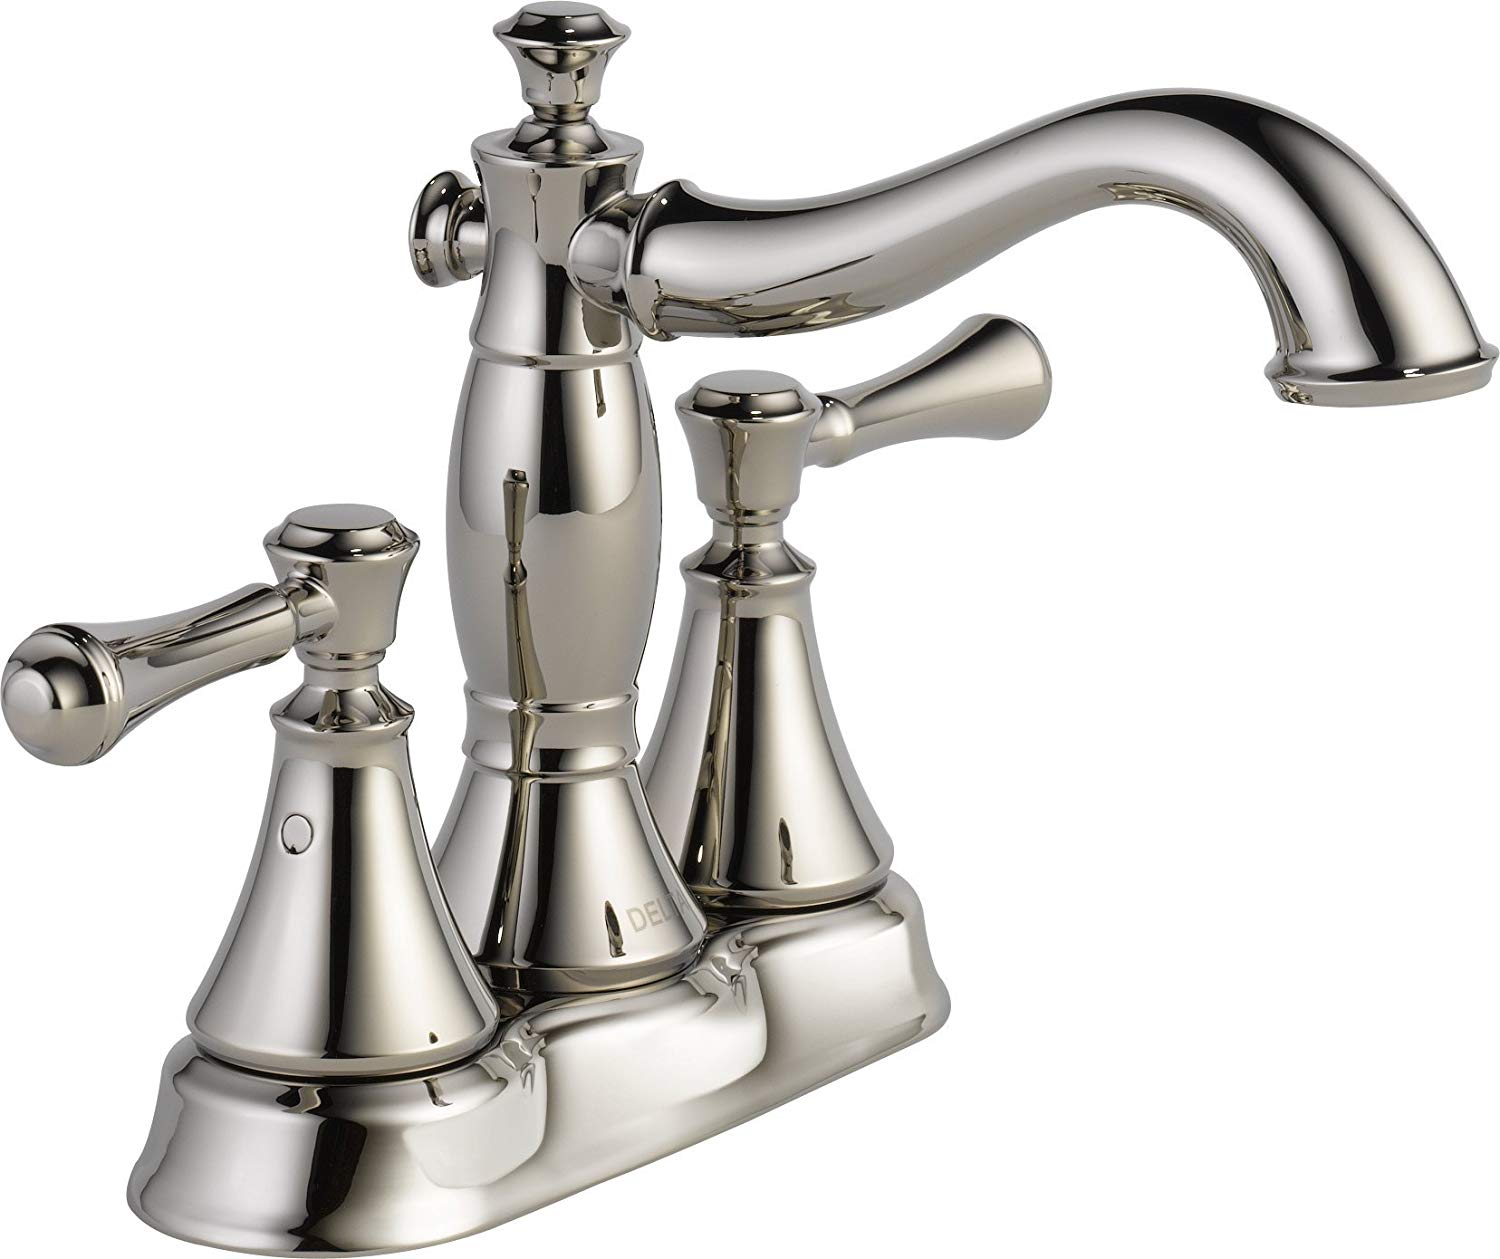 Cassidy Centerset Lavatory Faucet in Polished Nickel